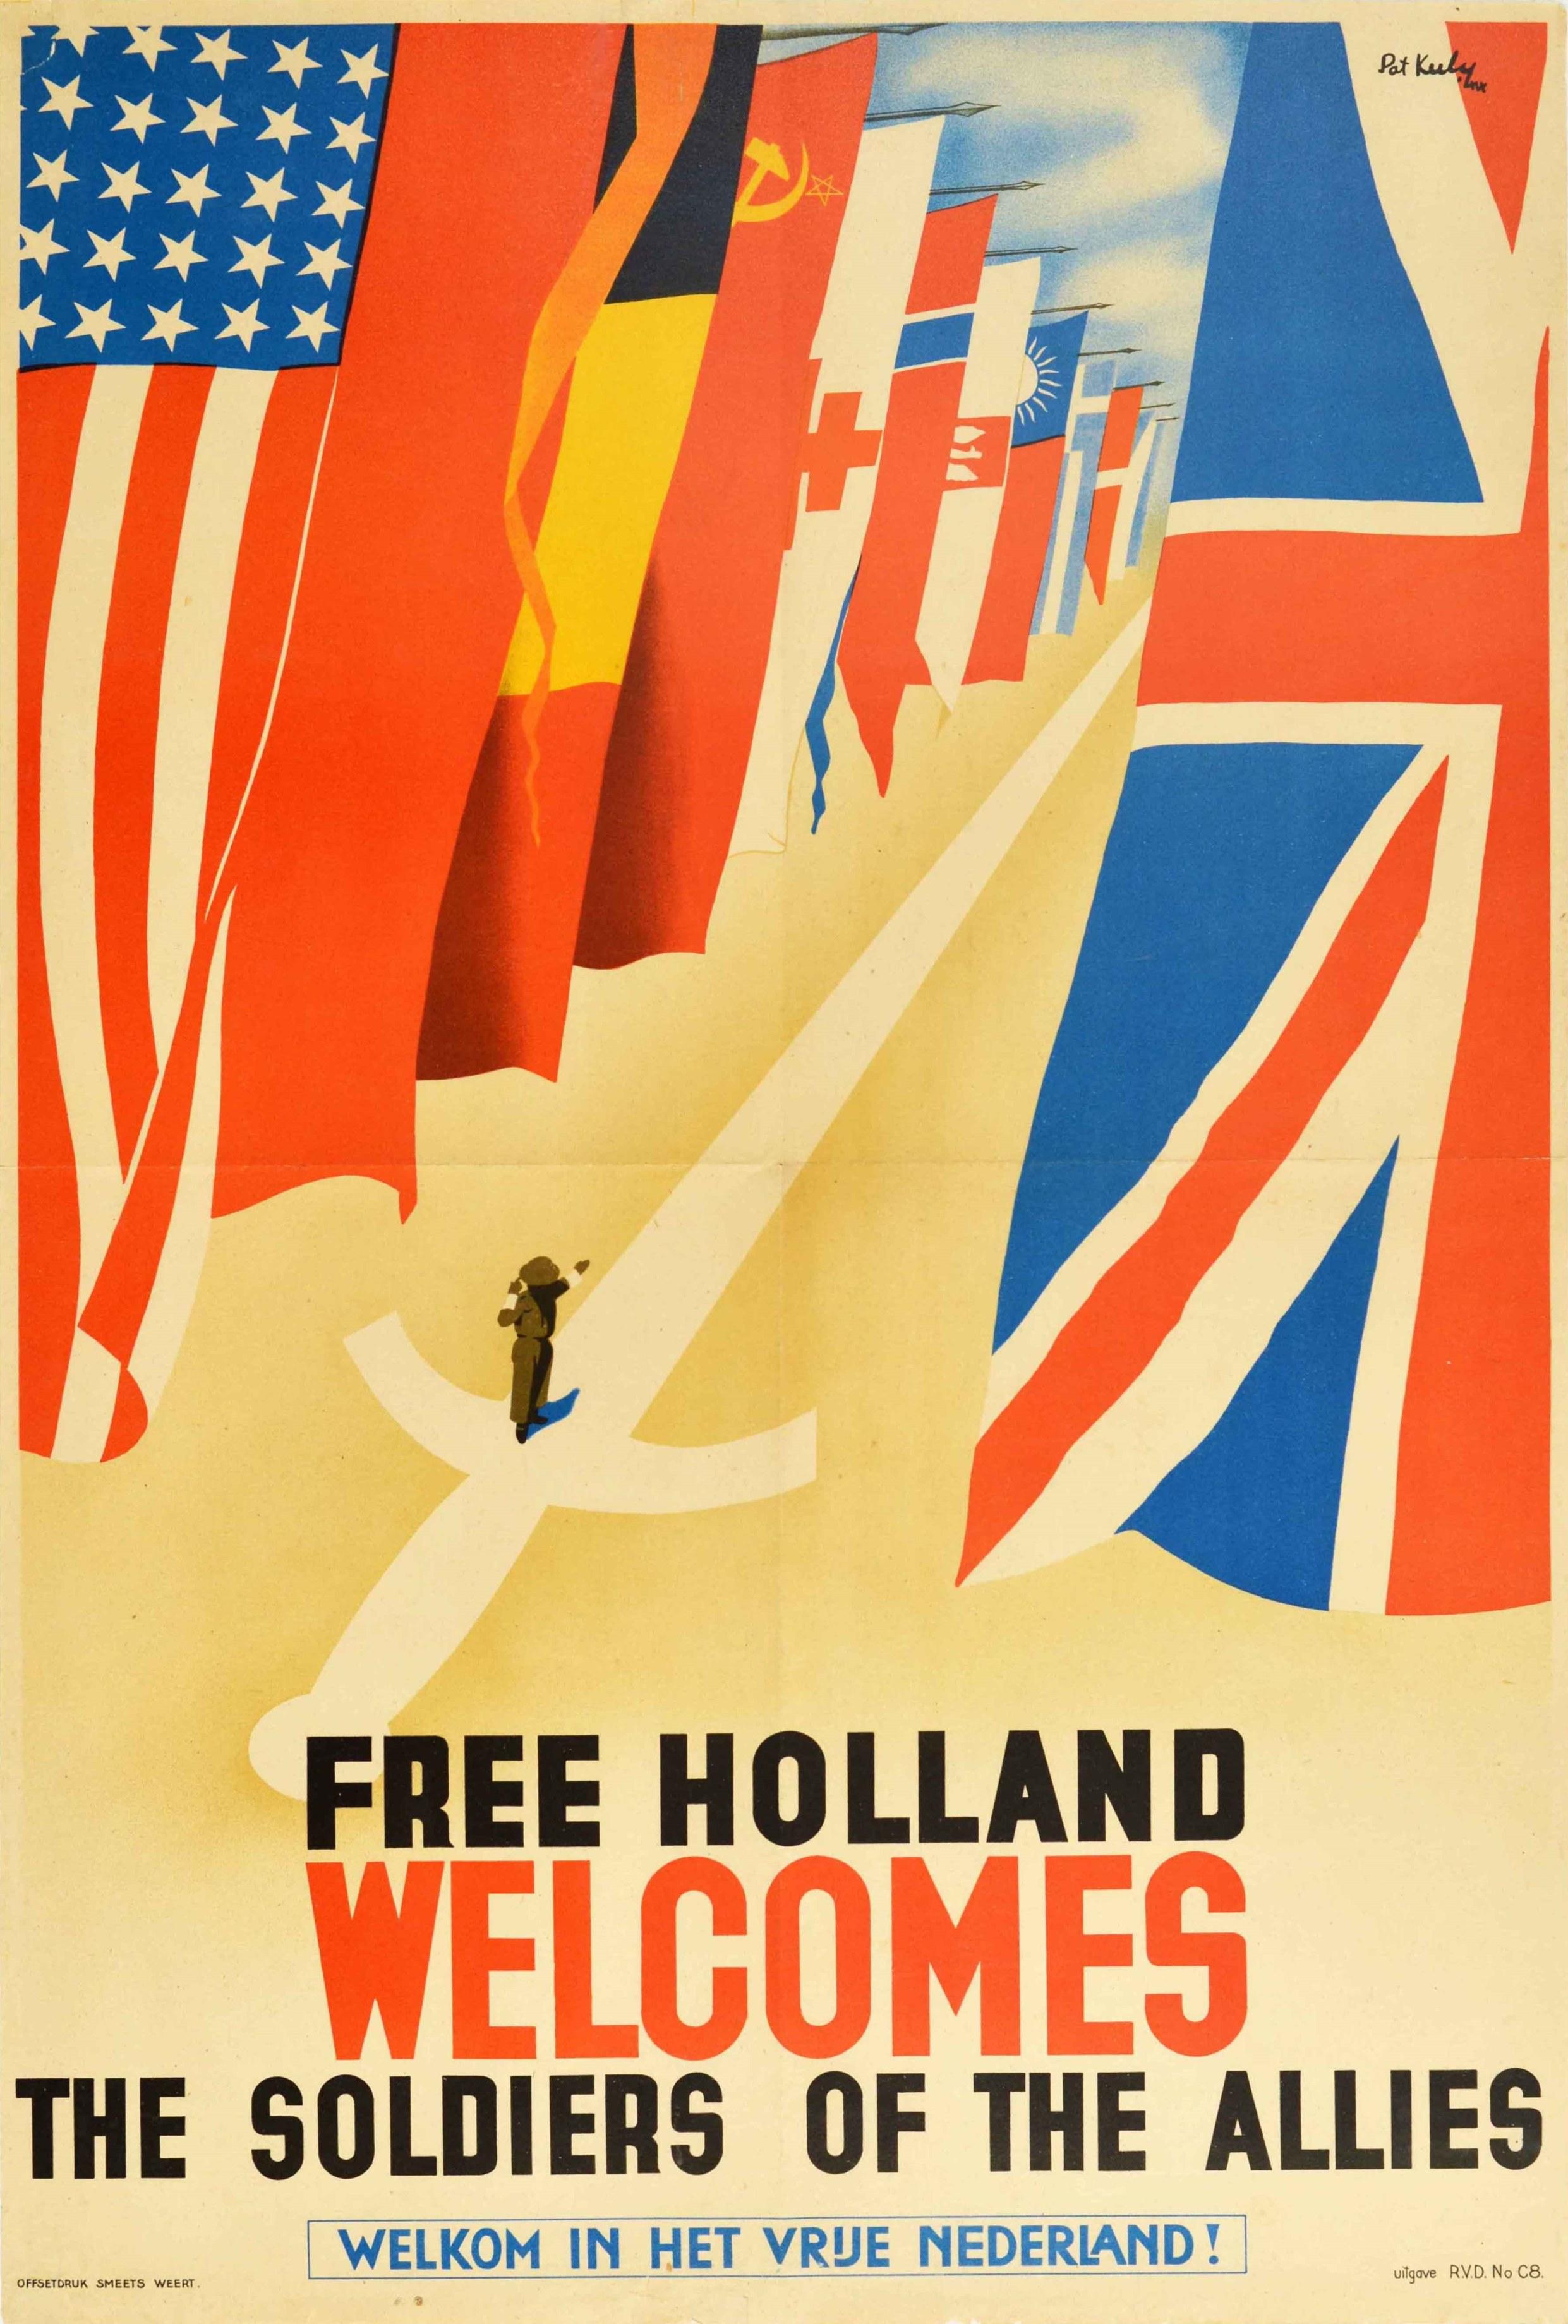 Original vintage World War Two propaganda poster - Free Holland Welcomes the Soldiers of the Allies / Welkom in het vrije Nederland! Dynamic design by the notable British graphic artist Pat Keely (1901-1970), depicting a soldier indicating on the